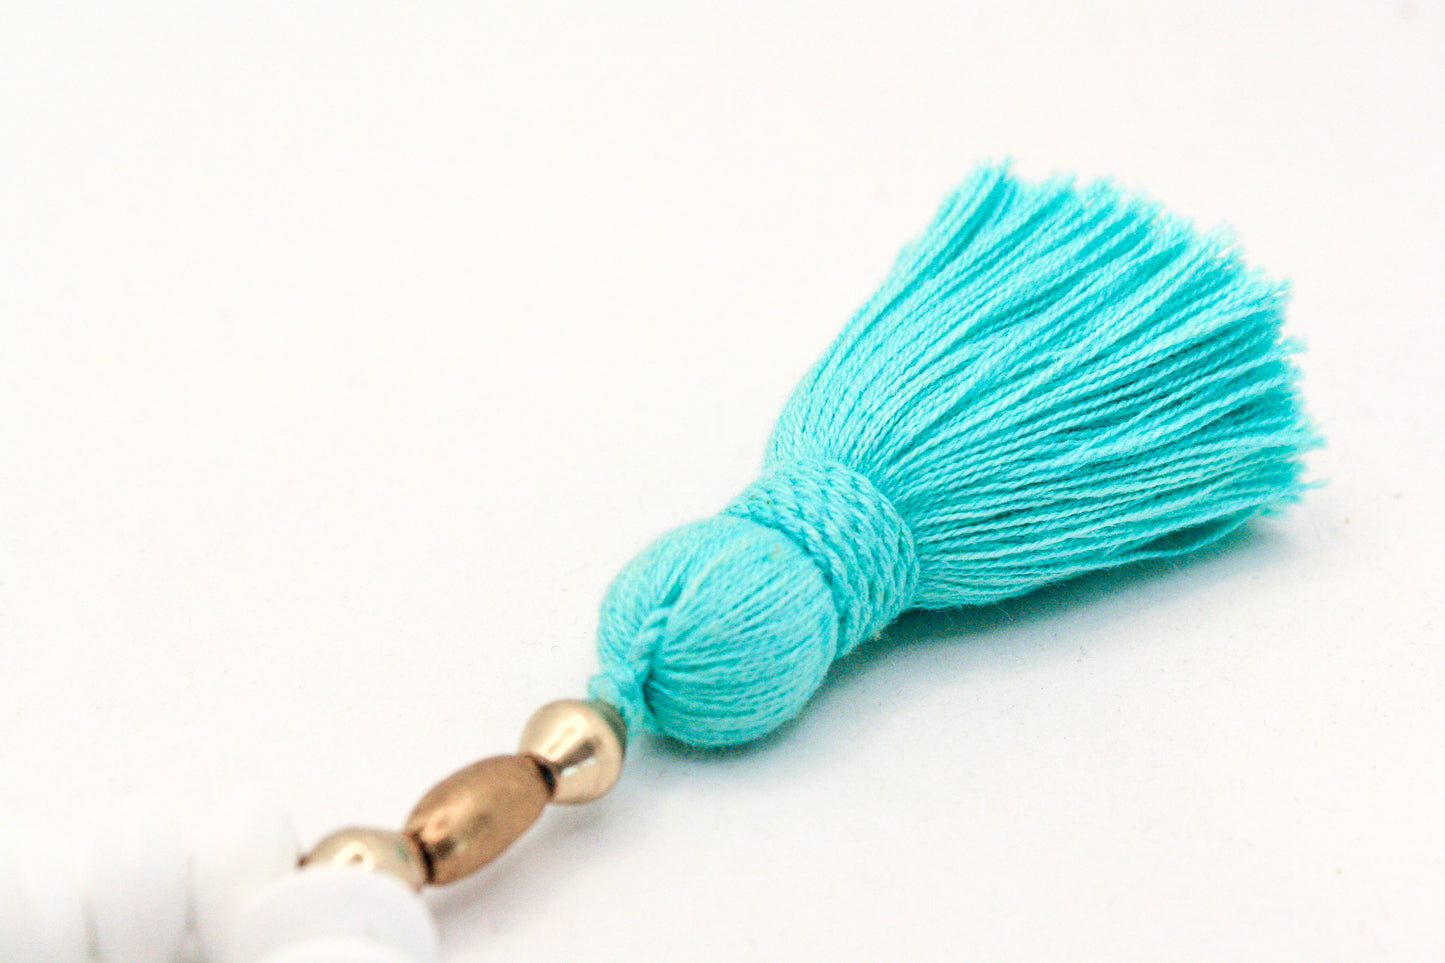 Ultimate Beach Vacation Tassel Necklace